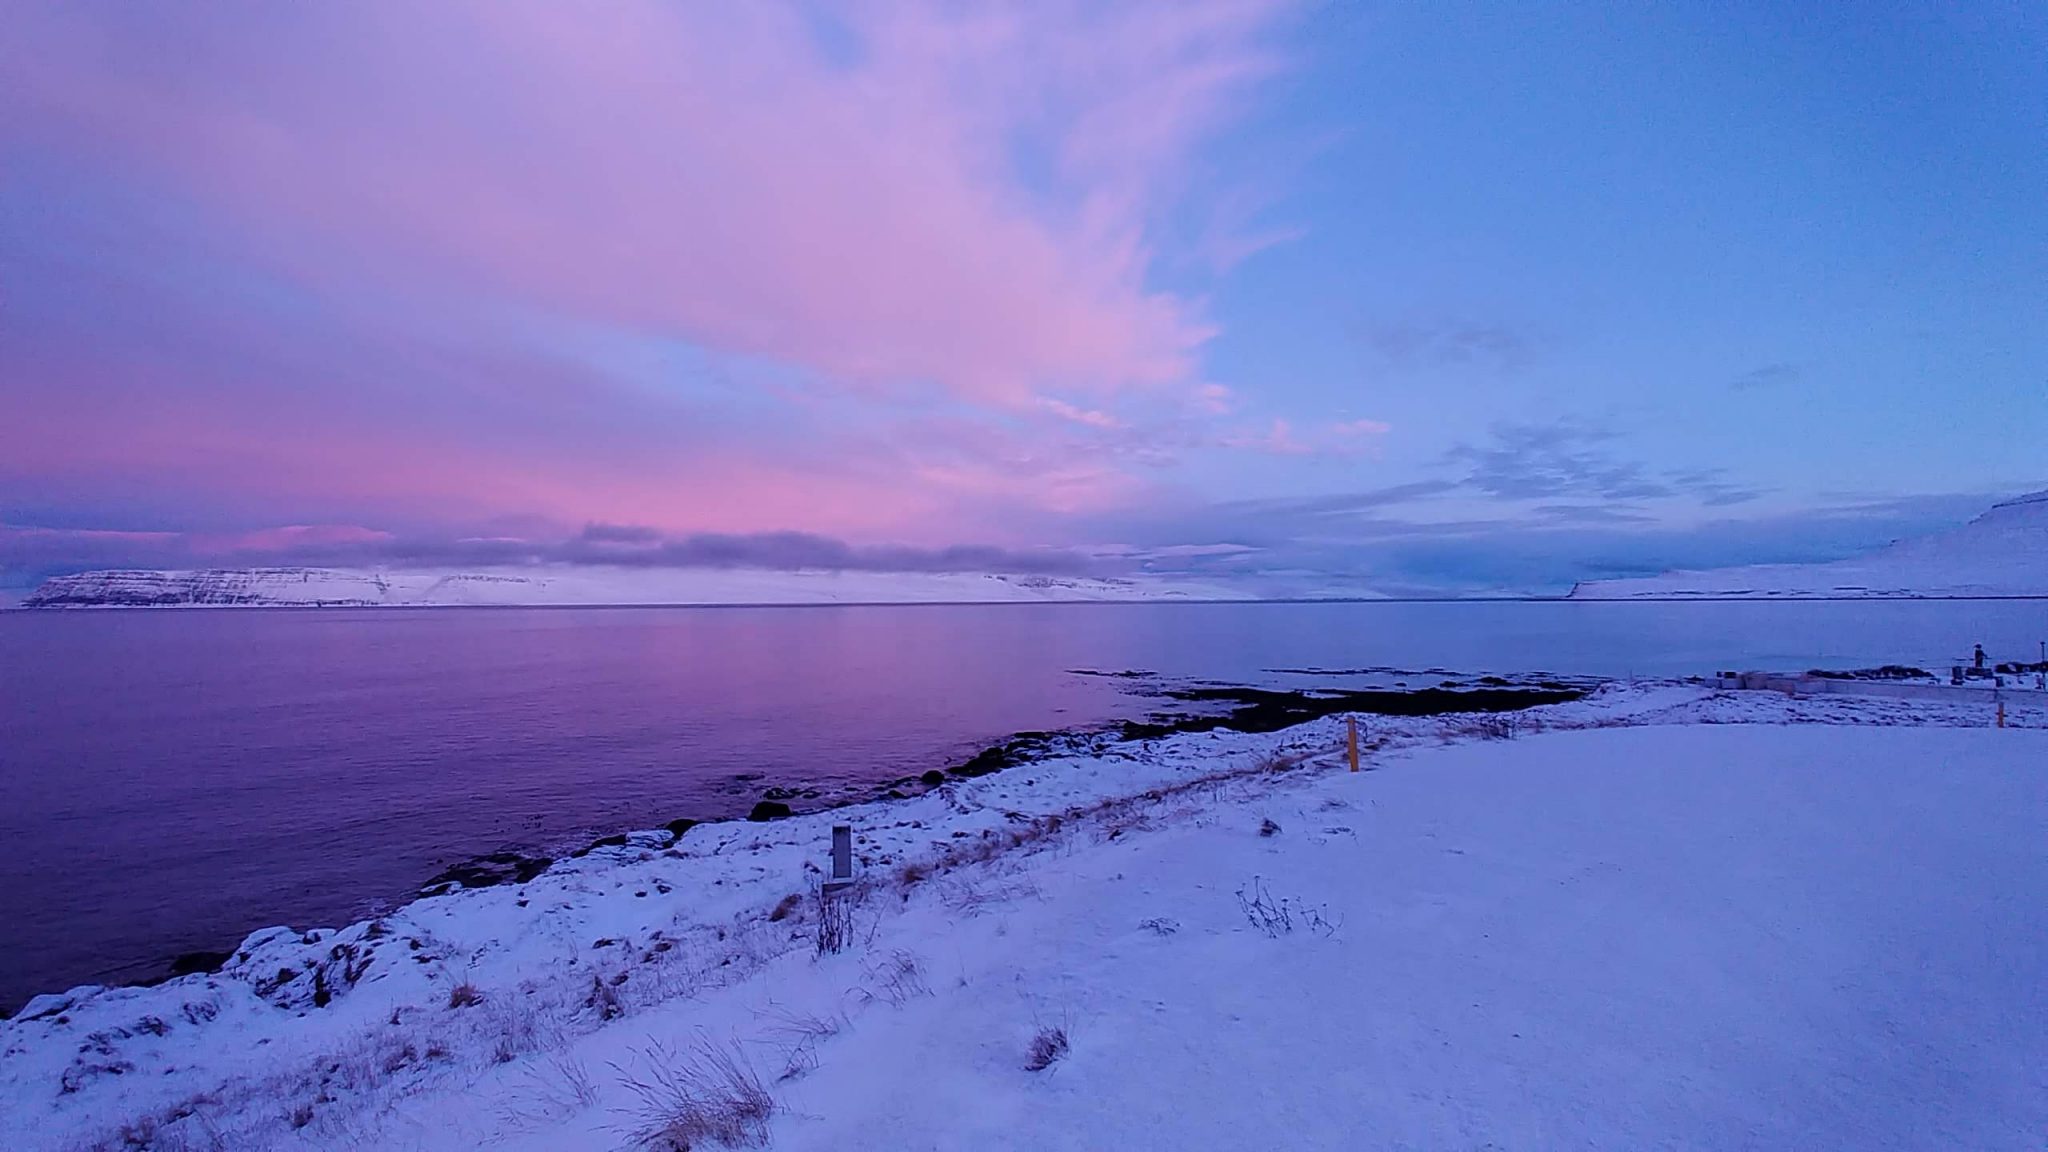 Pink WInter Day in Isafjordur Bay